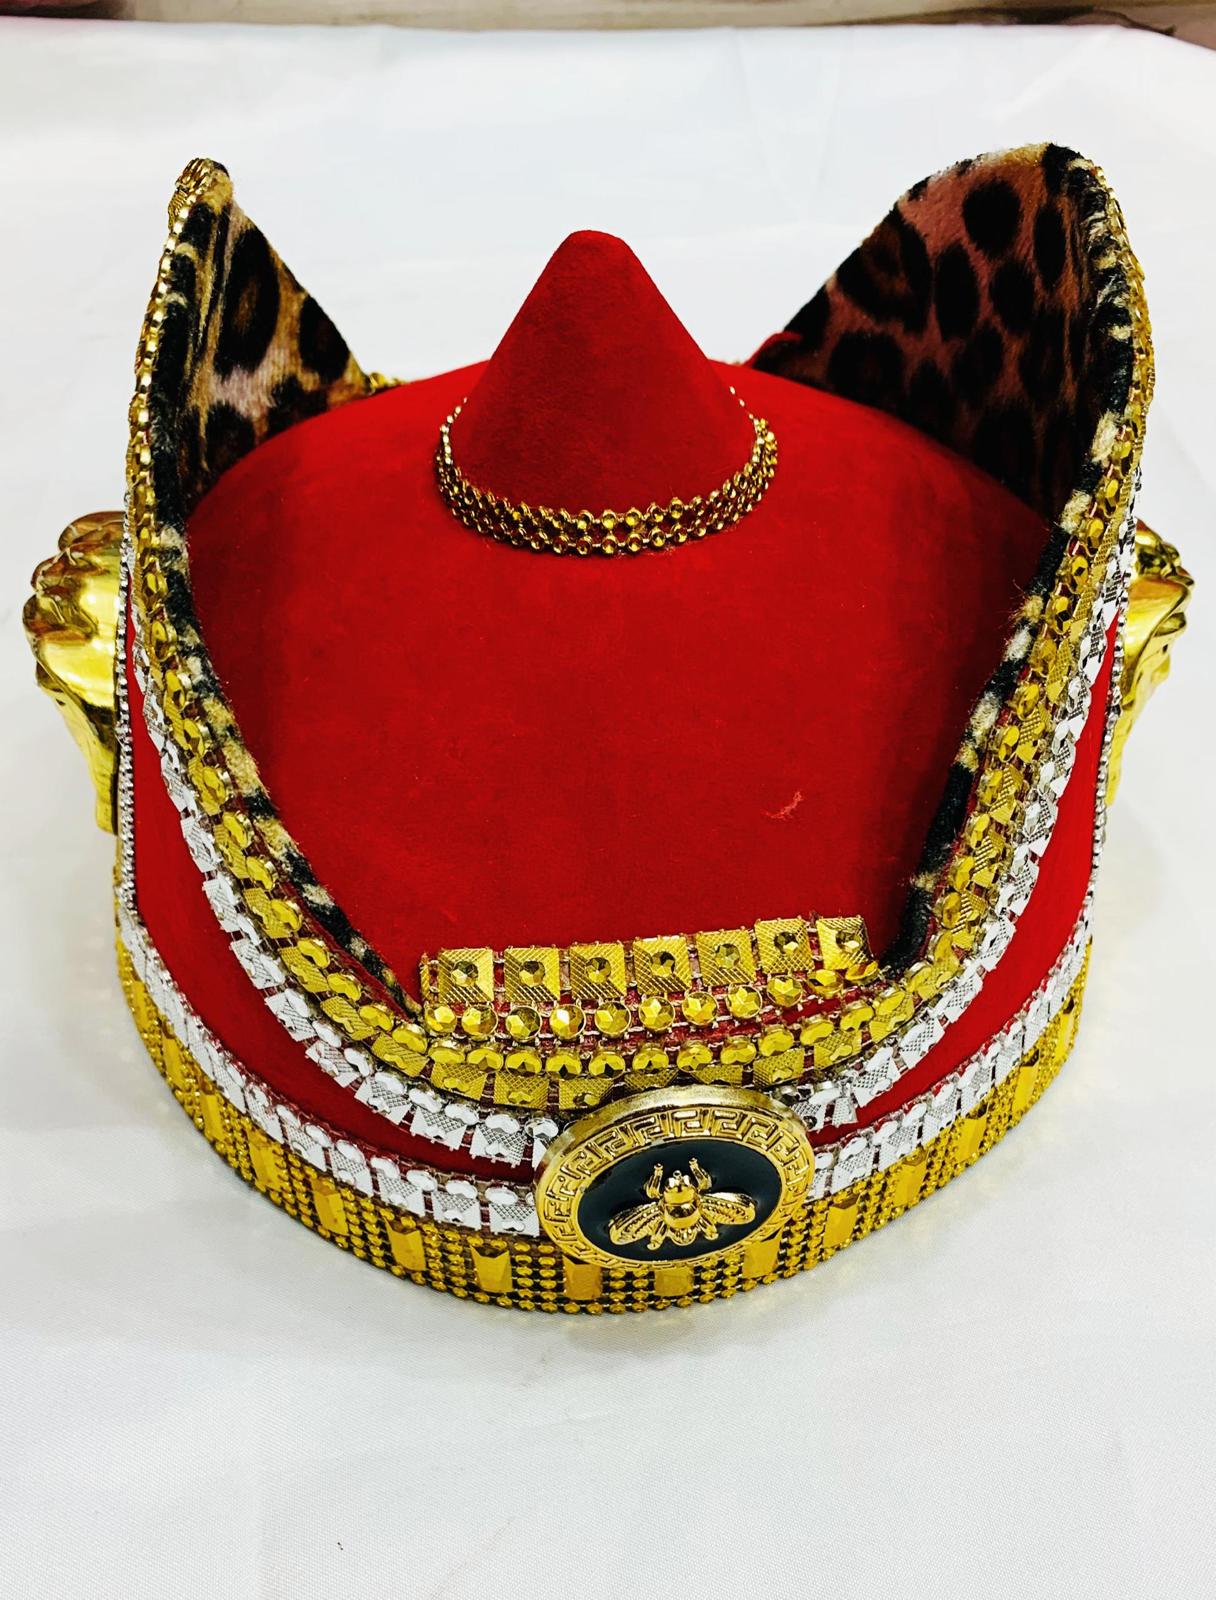 Engraved gold Igbo Cap, African Royal Hat, Odogwu Cap, Ichie Hat, Kings Cap, prefect for Kingly figure, groom, costume wears. SHIP NEXT DAY